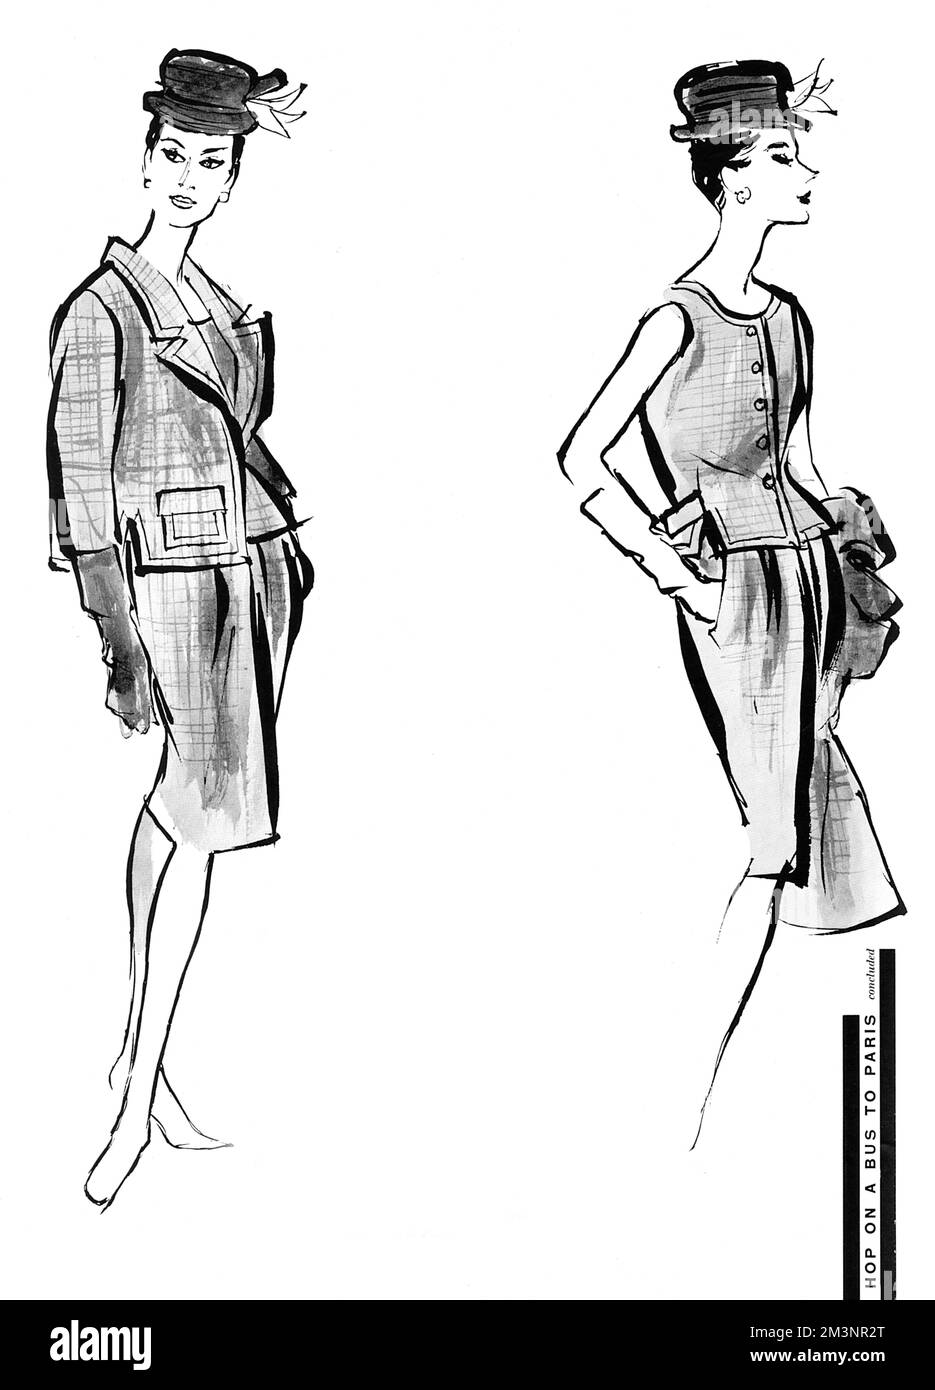 A coat, jacket and skirt by Balenciaga displaying the cllllean tailoring and functional lines of his designs from this period.  The jacket on the right is sleeveless and collarless with a concave front and a half-belted bloused back, double seaming and side vents.  The skirt is gathered with unpressed pleats into the waistband and tapers to a hemline barely covering the kneecap.  The short coat has set-in, chopped off three-quarter sleeves, a straight back and a repetition of the side vents and double-seaming.       Date: 1960 Stock Photo